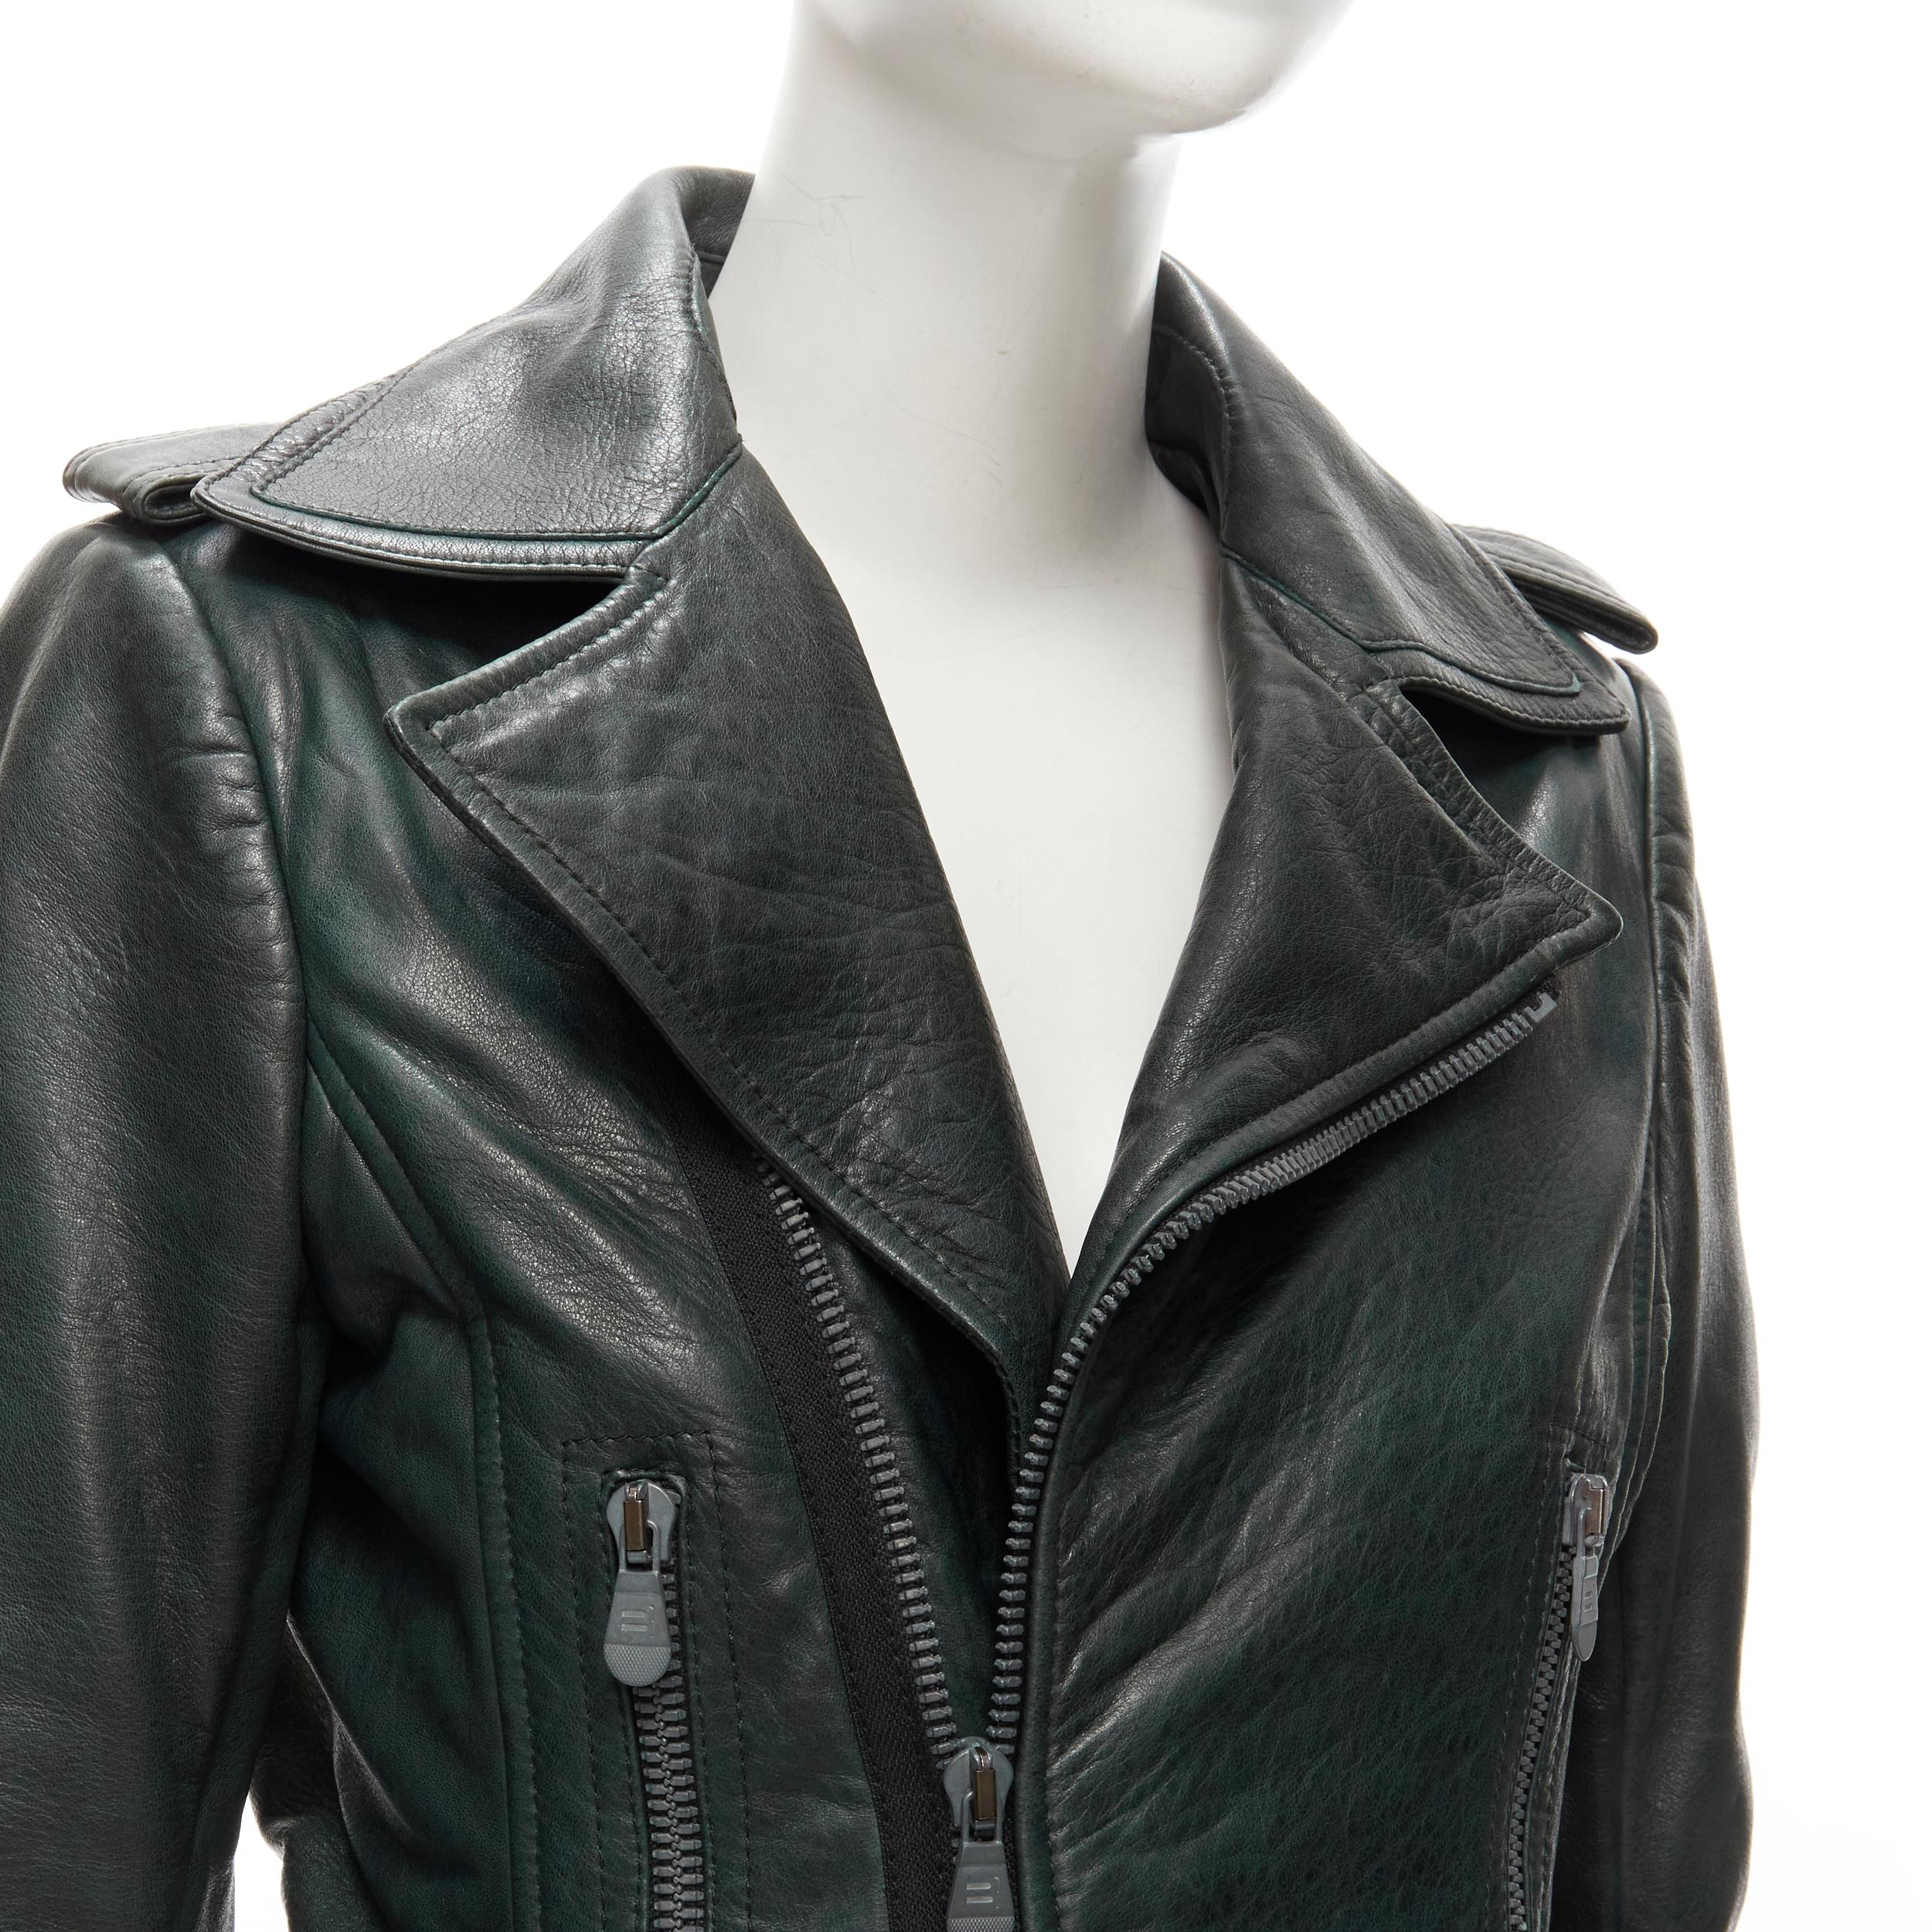 BALENCIAGA Nicholas Ghesquiere 2010 dark green tumbled leather biker jacket FR42 L
Reference: JYLM/A00030
Brand: Balenciaga
Designer: Nicolas Ghesquiere
Material: Leather
Color: Green
Pattern: Solid
Closure: Zip
Lining: Green Fabric
Extra Details: B